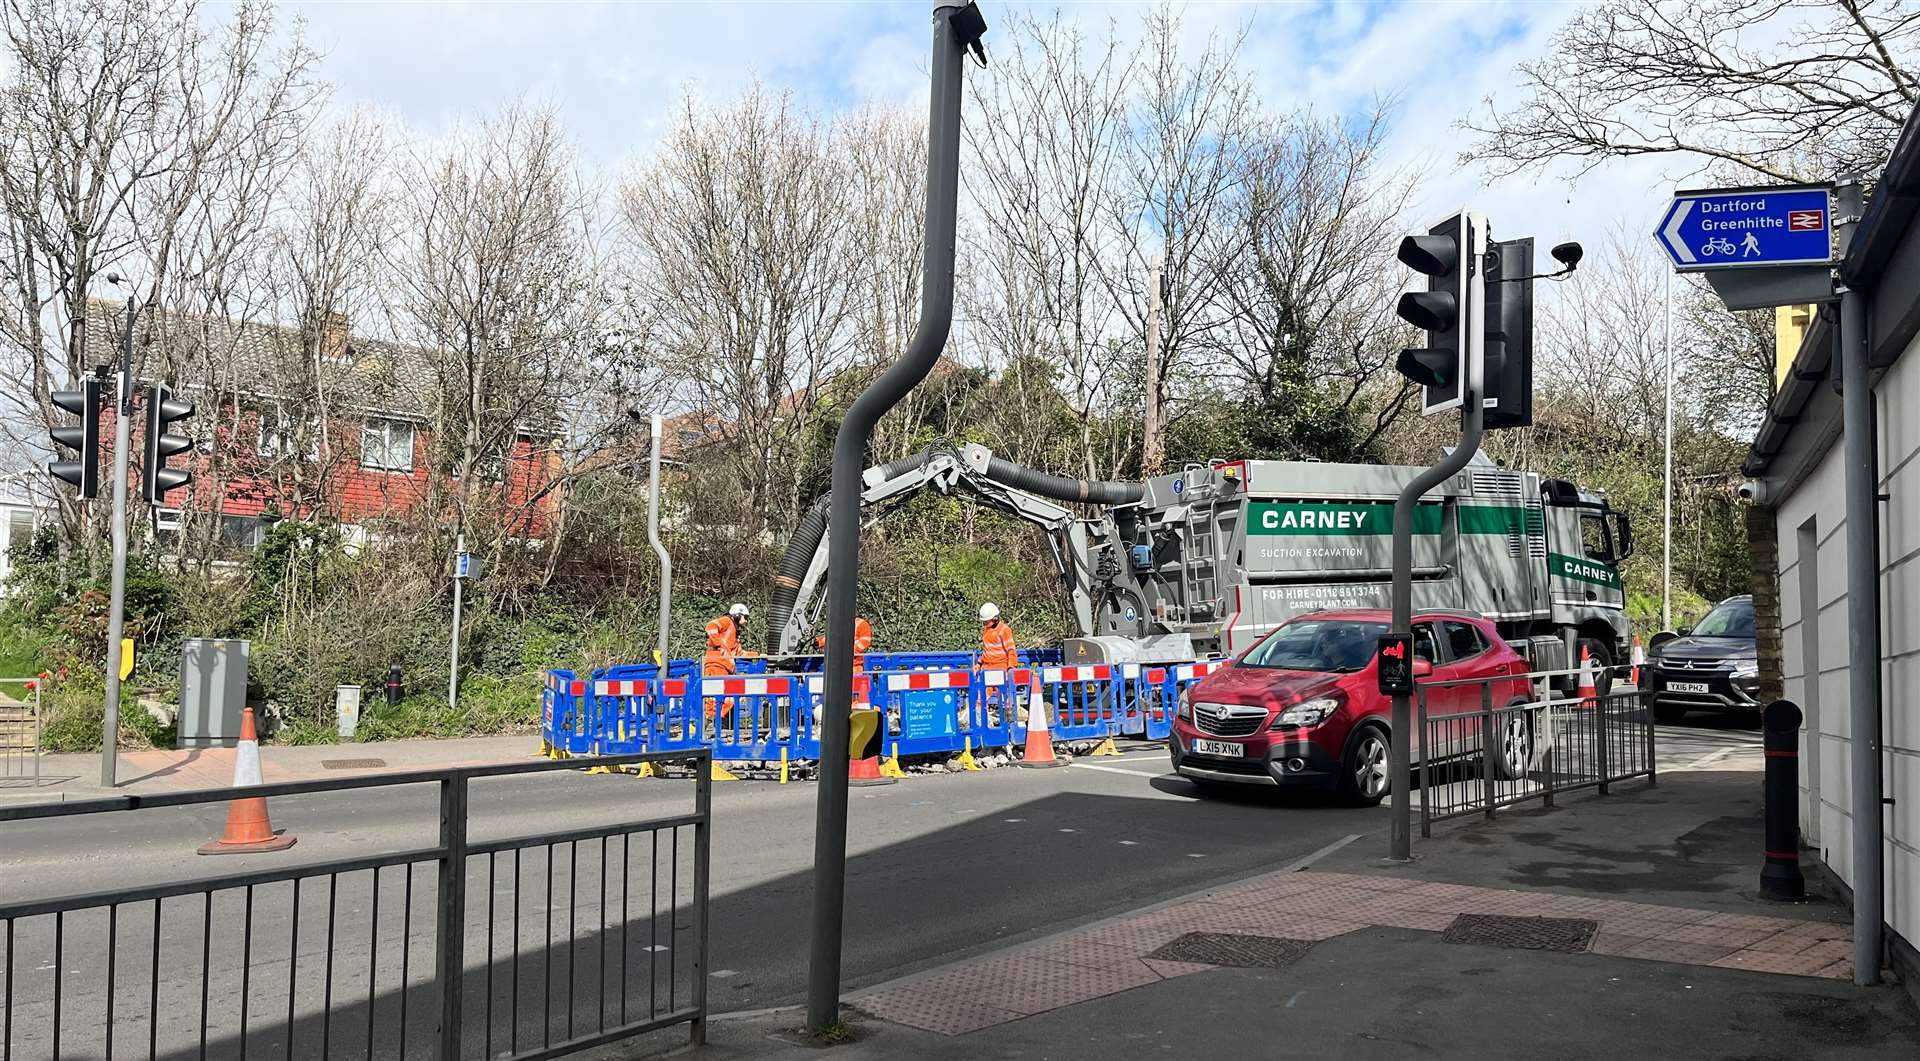 Thames Water has shut off London Road by McDonald's again